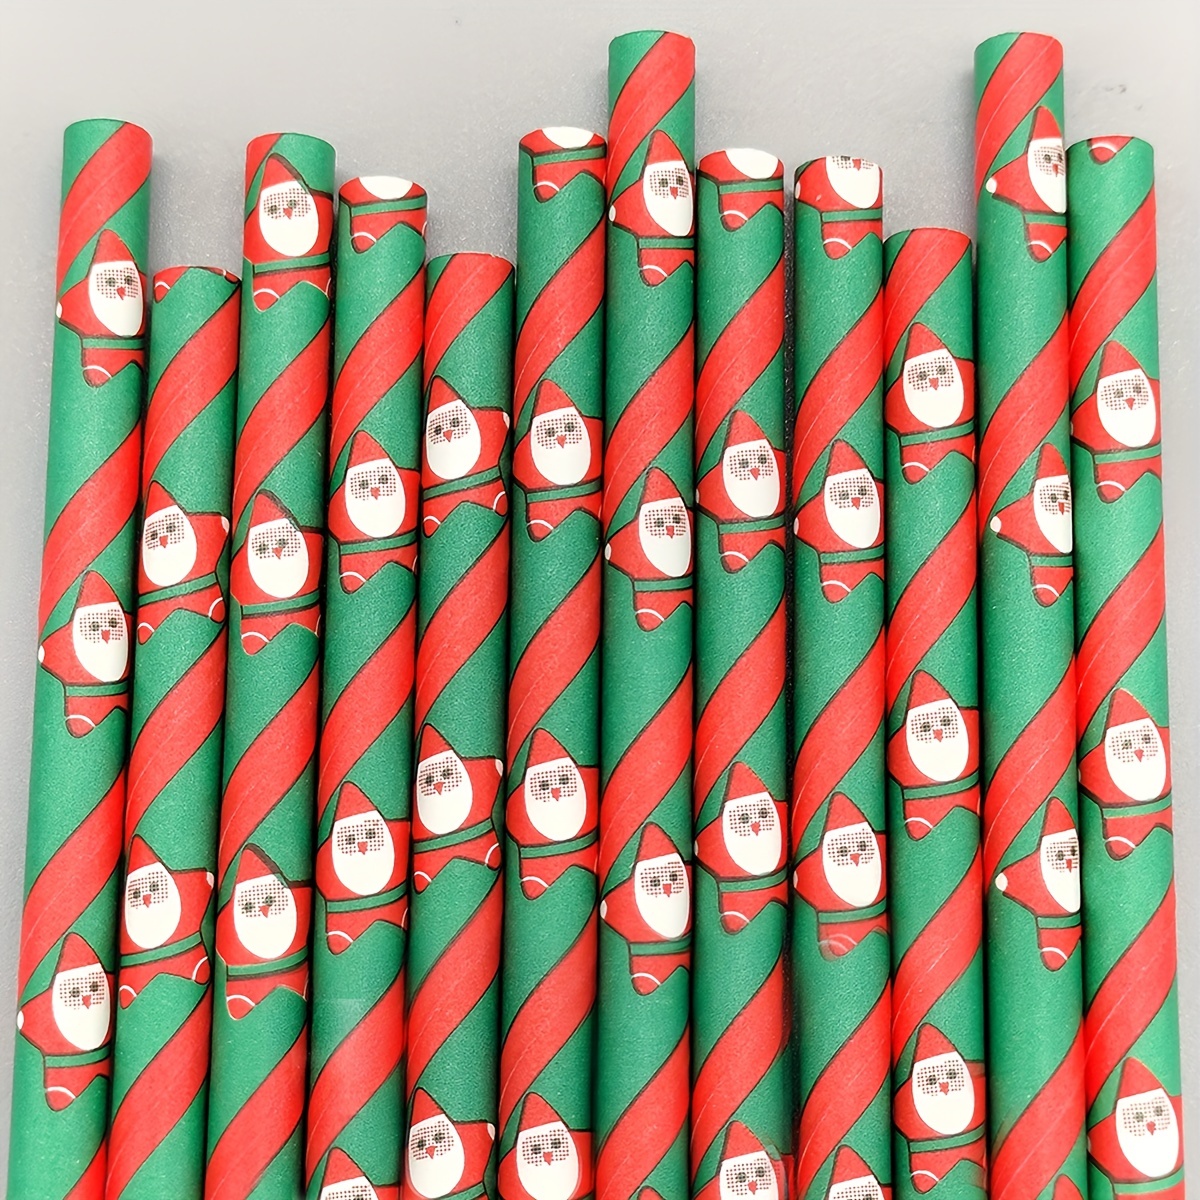 25pcs Disposable Red & Green Stripe Candy Cane Paper Straws